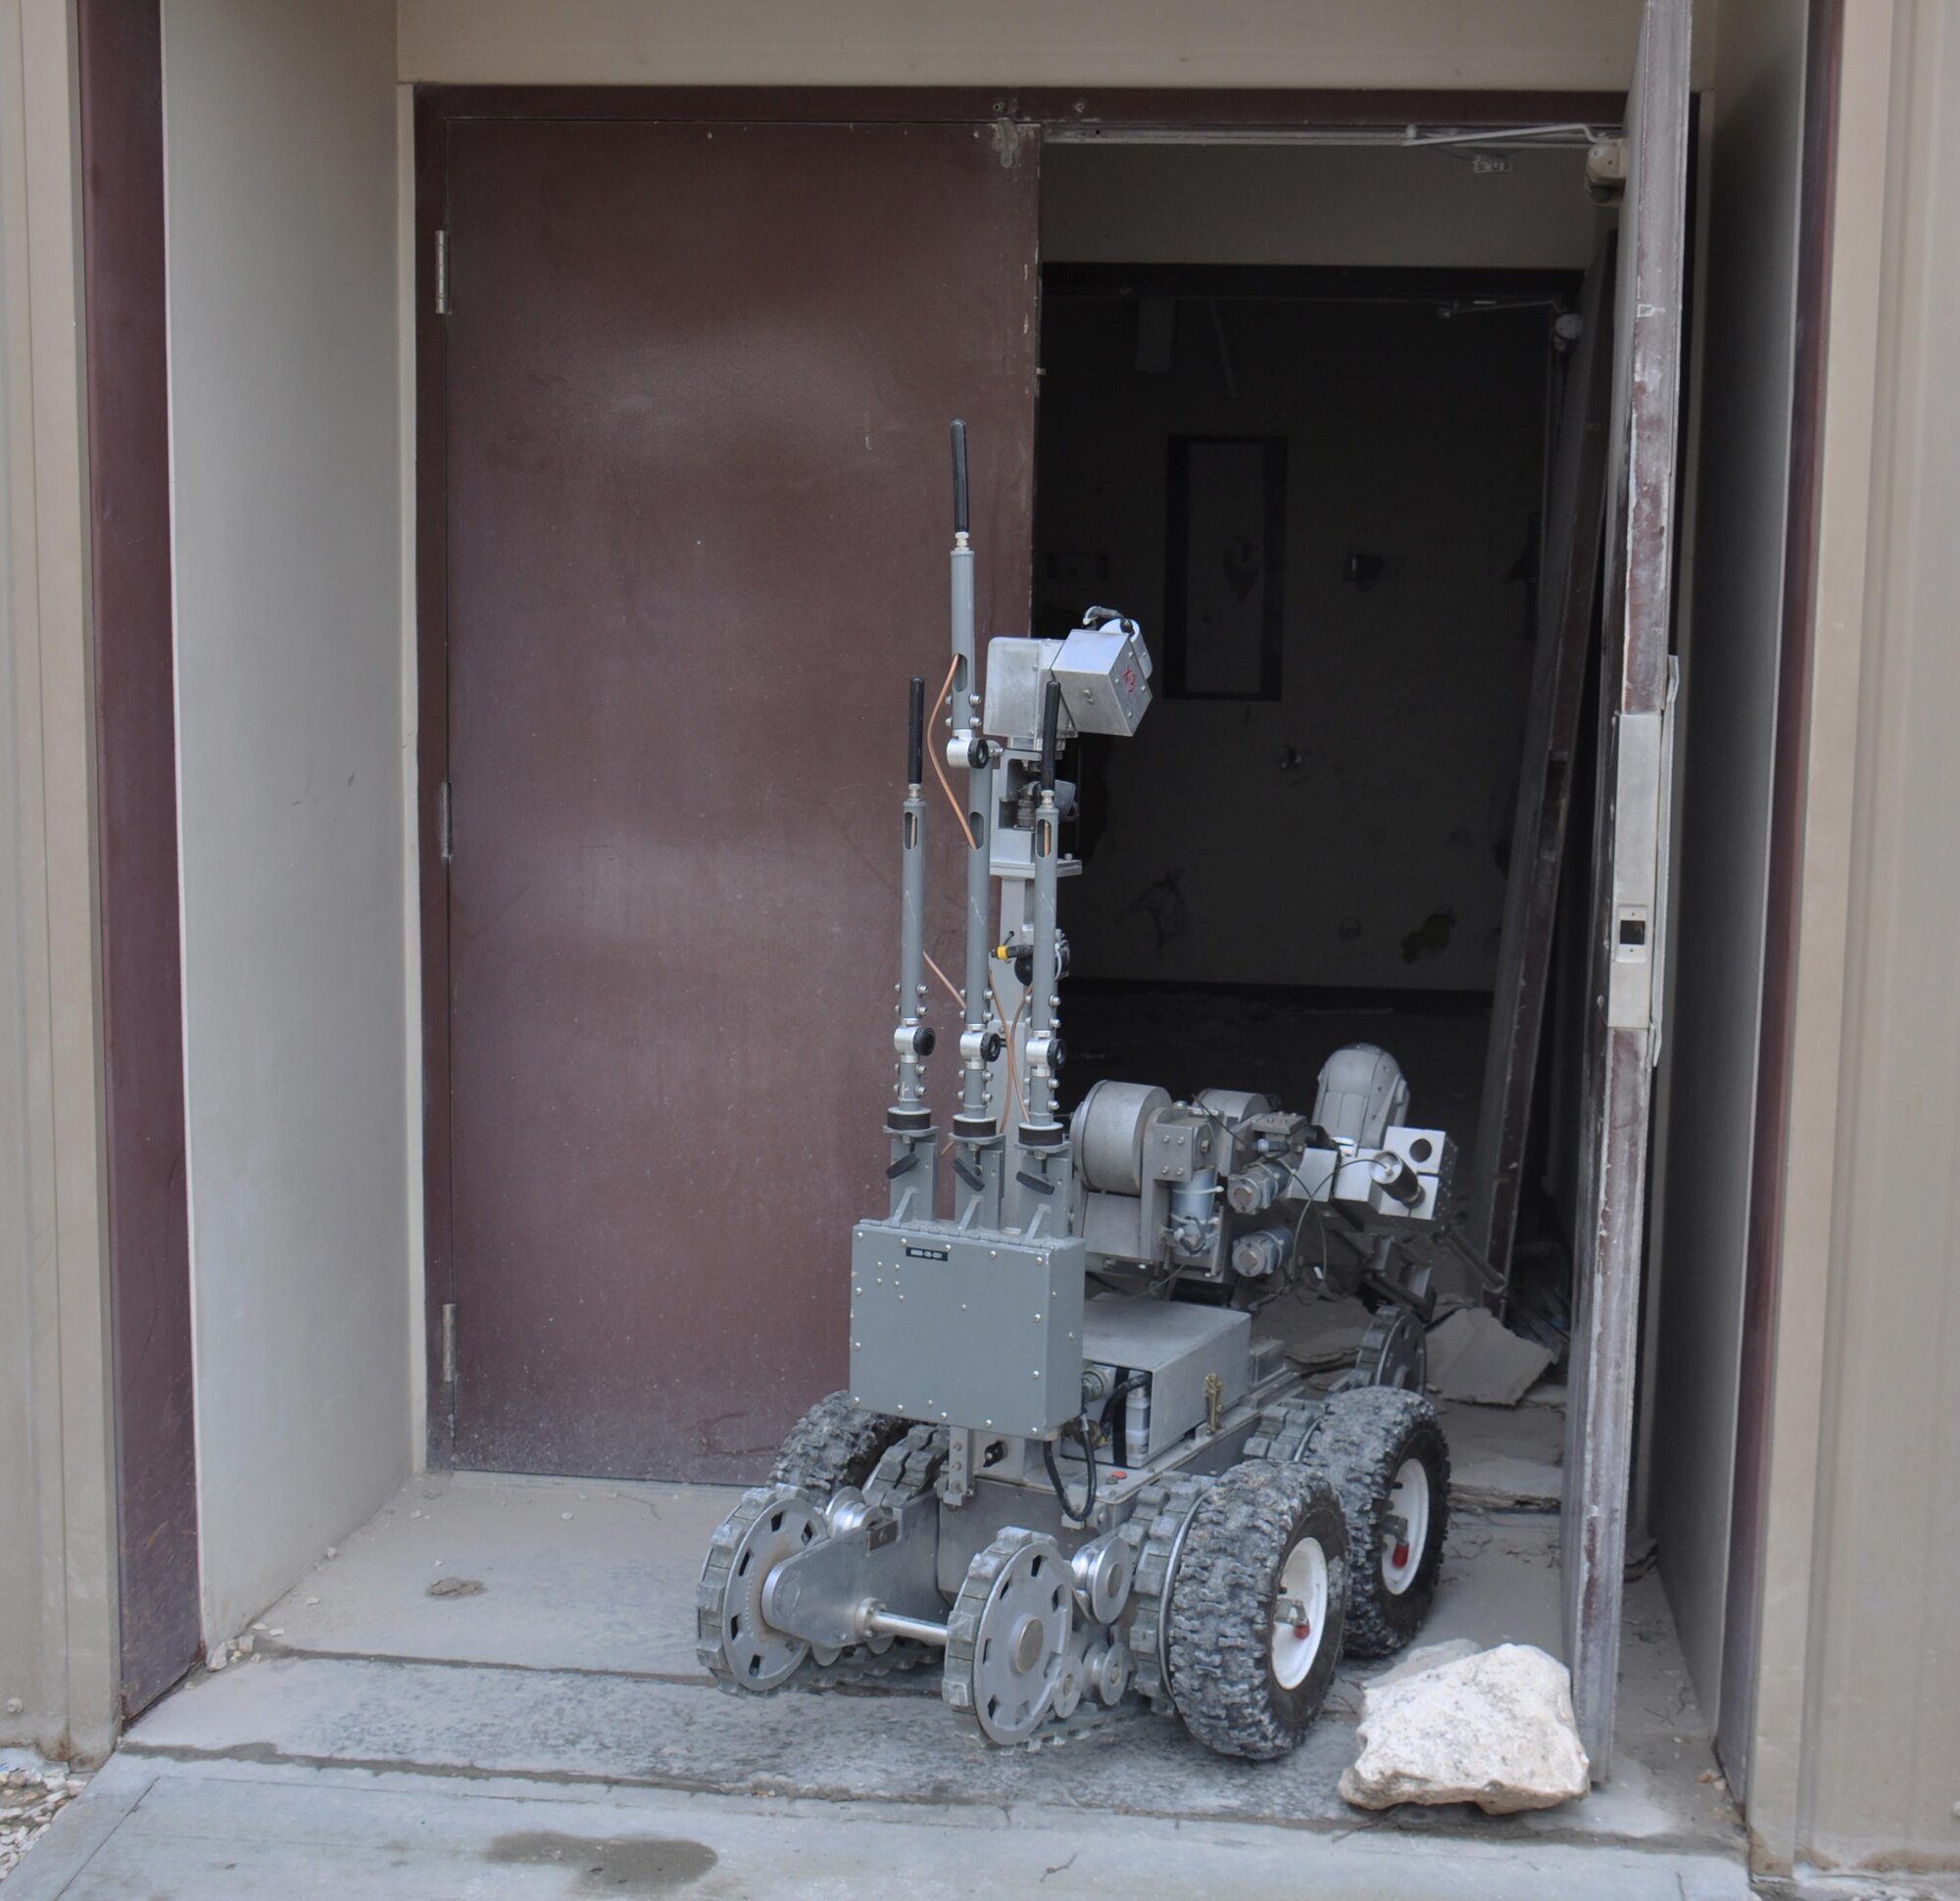 An F-6 robot enters a building to search for mock explosives during a hazardous materials exercise at Al Udeid Air Base, Qatar March 16. The robot is assigned to the 379th Expeditionary Civil Engineer Squadron Explosive Ordnance Flight and assists EOD technicians with locating explosives. The training exercise provided first responders an opportunity to practice reacting to an emergency incident. Several emergency personnel participated in the exercise including security forces and medics. (U.S. Air Force photo by Tech. Sgt. James Hodgman/Released)